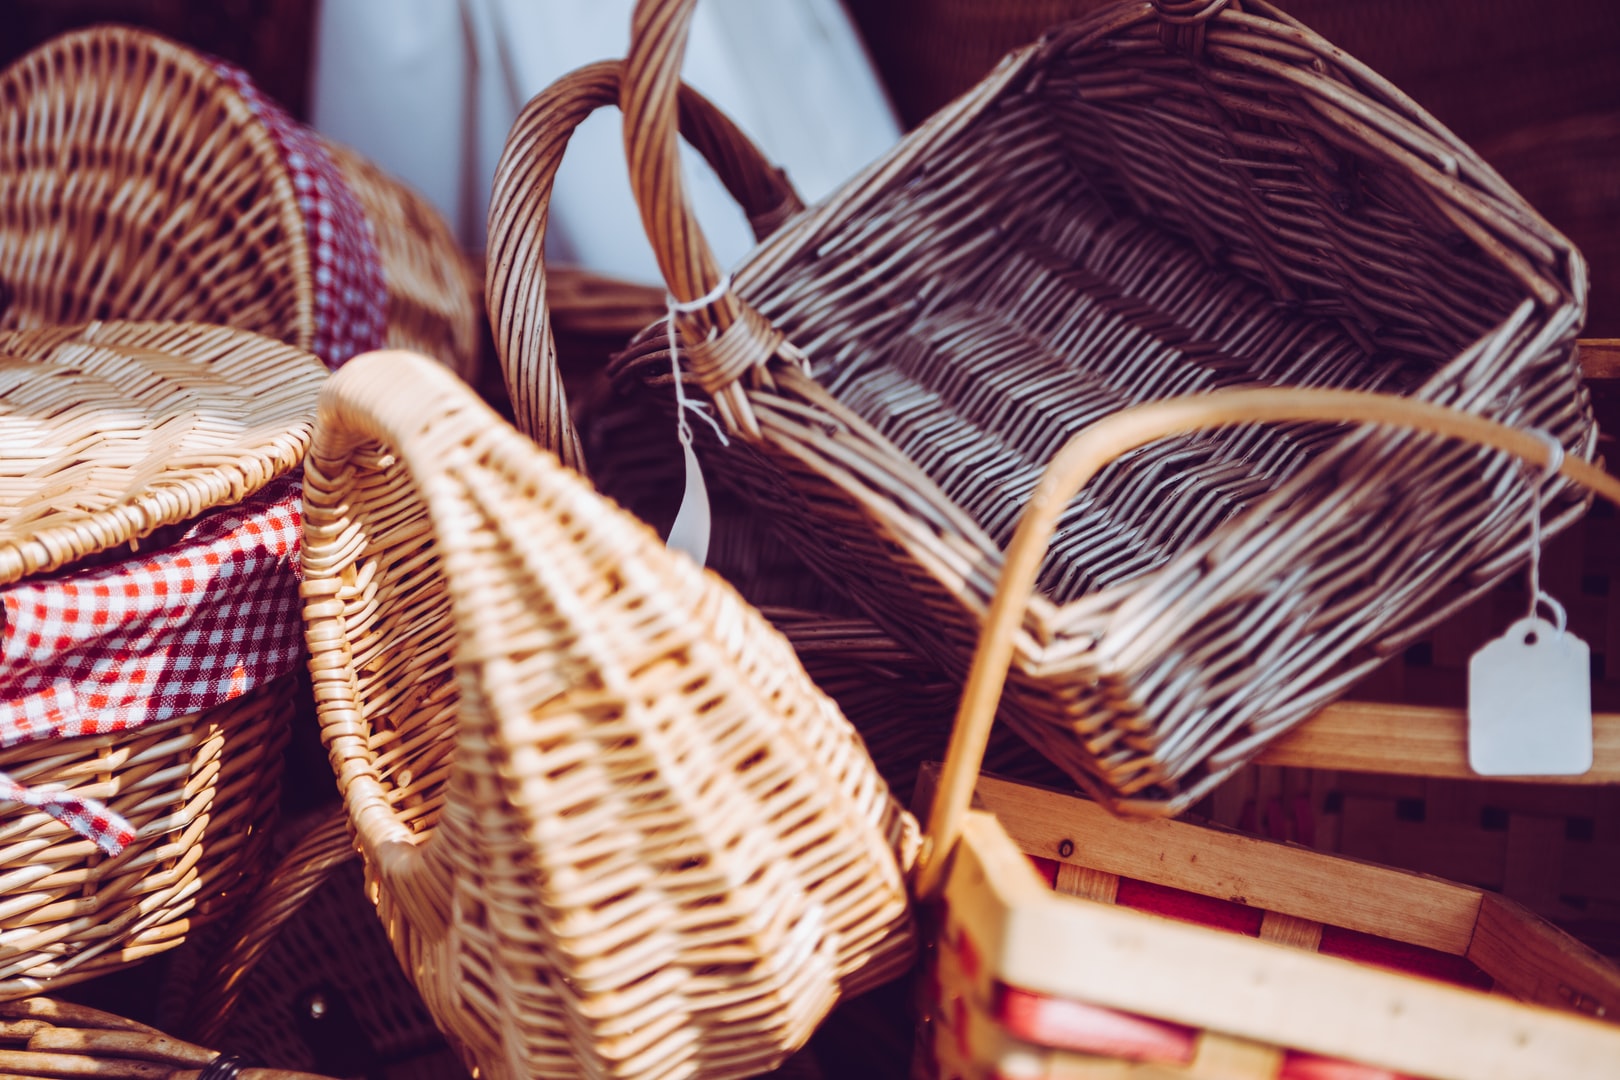 A photo of a collection of rattan baskets and hampers